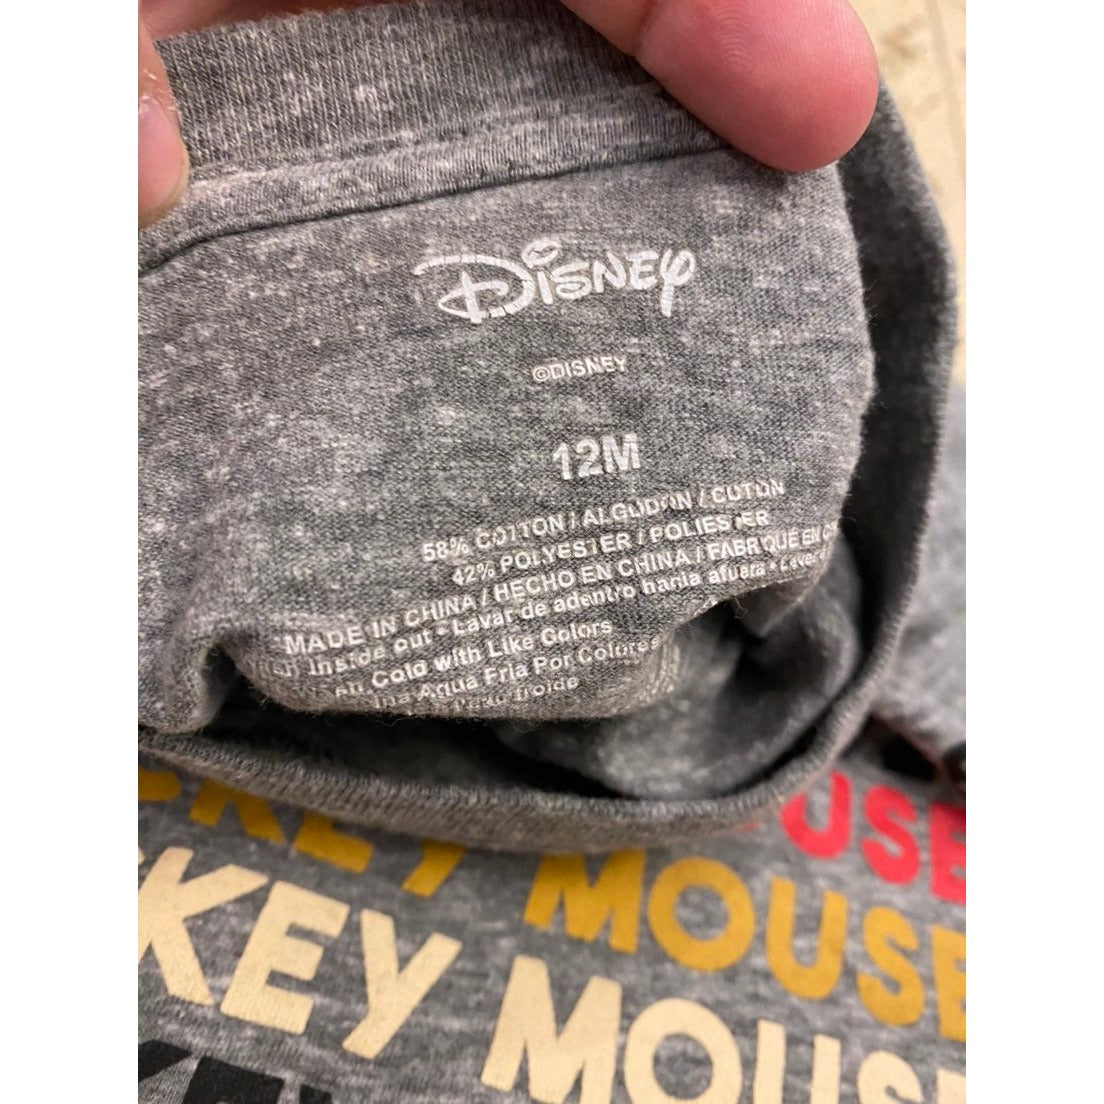 12 months vintage mickey mouse tee